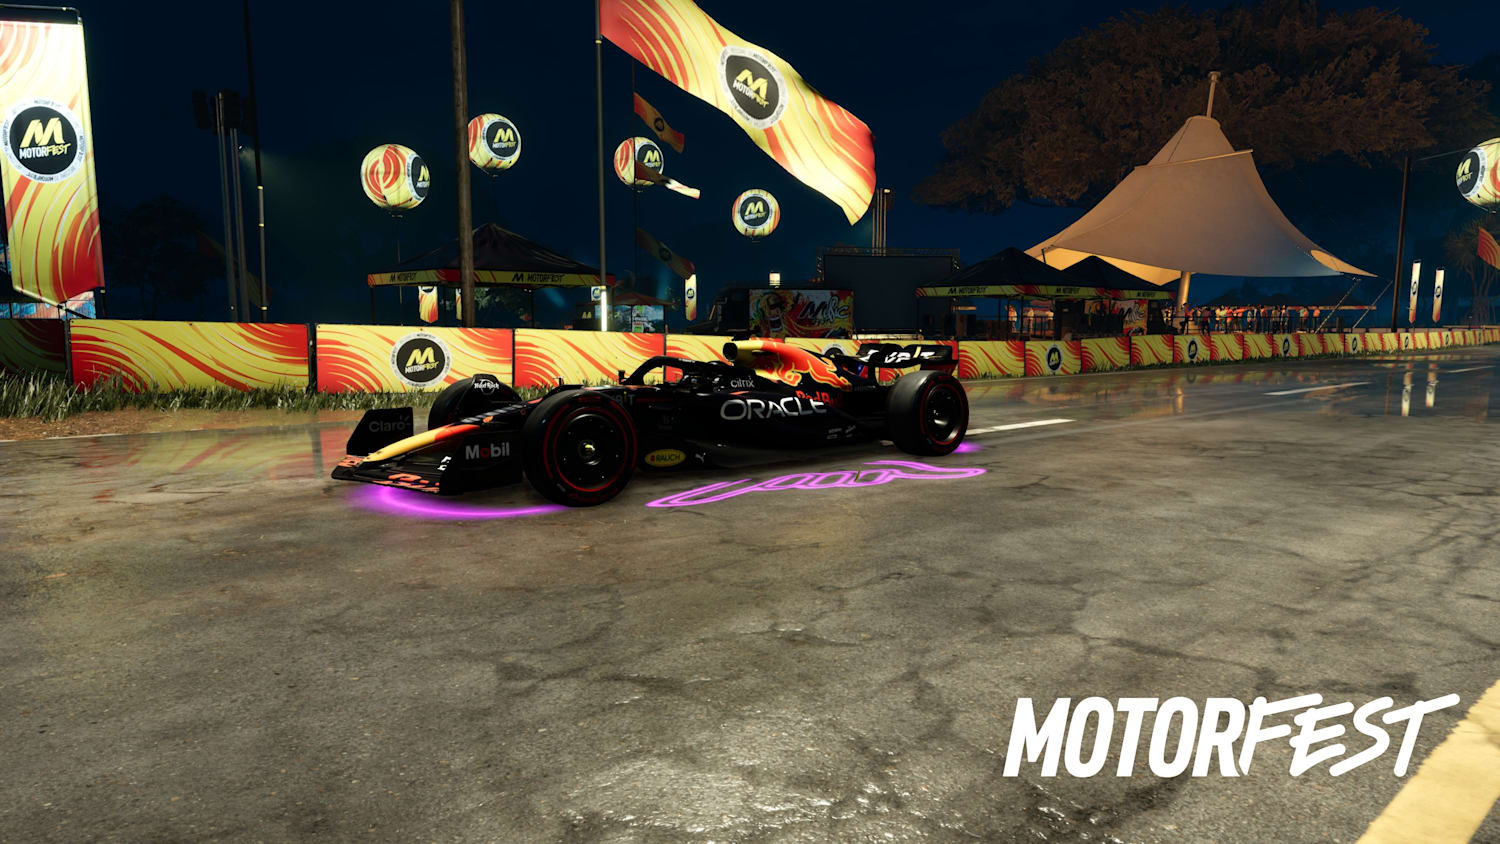 How to use The Crew Motorfest photo mode